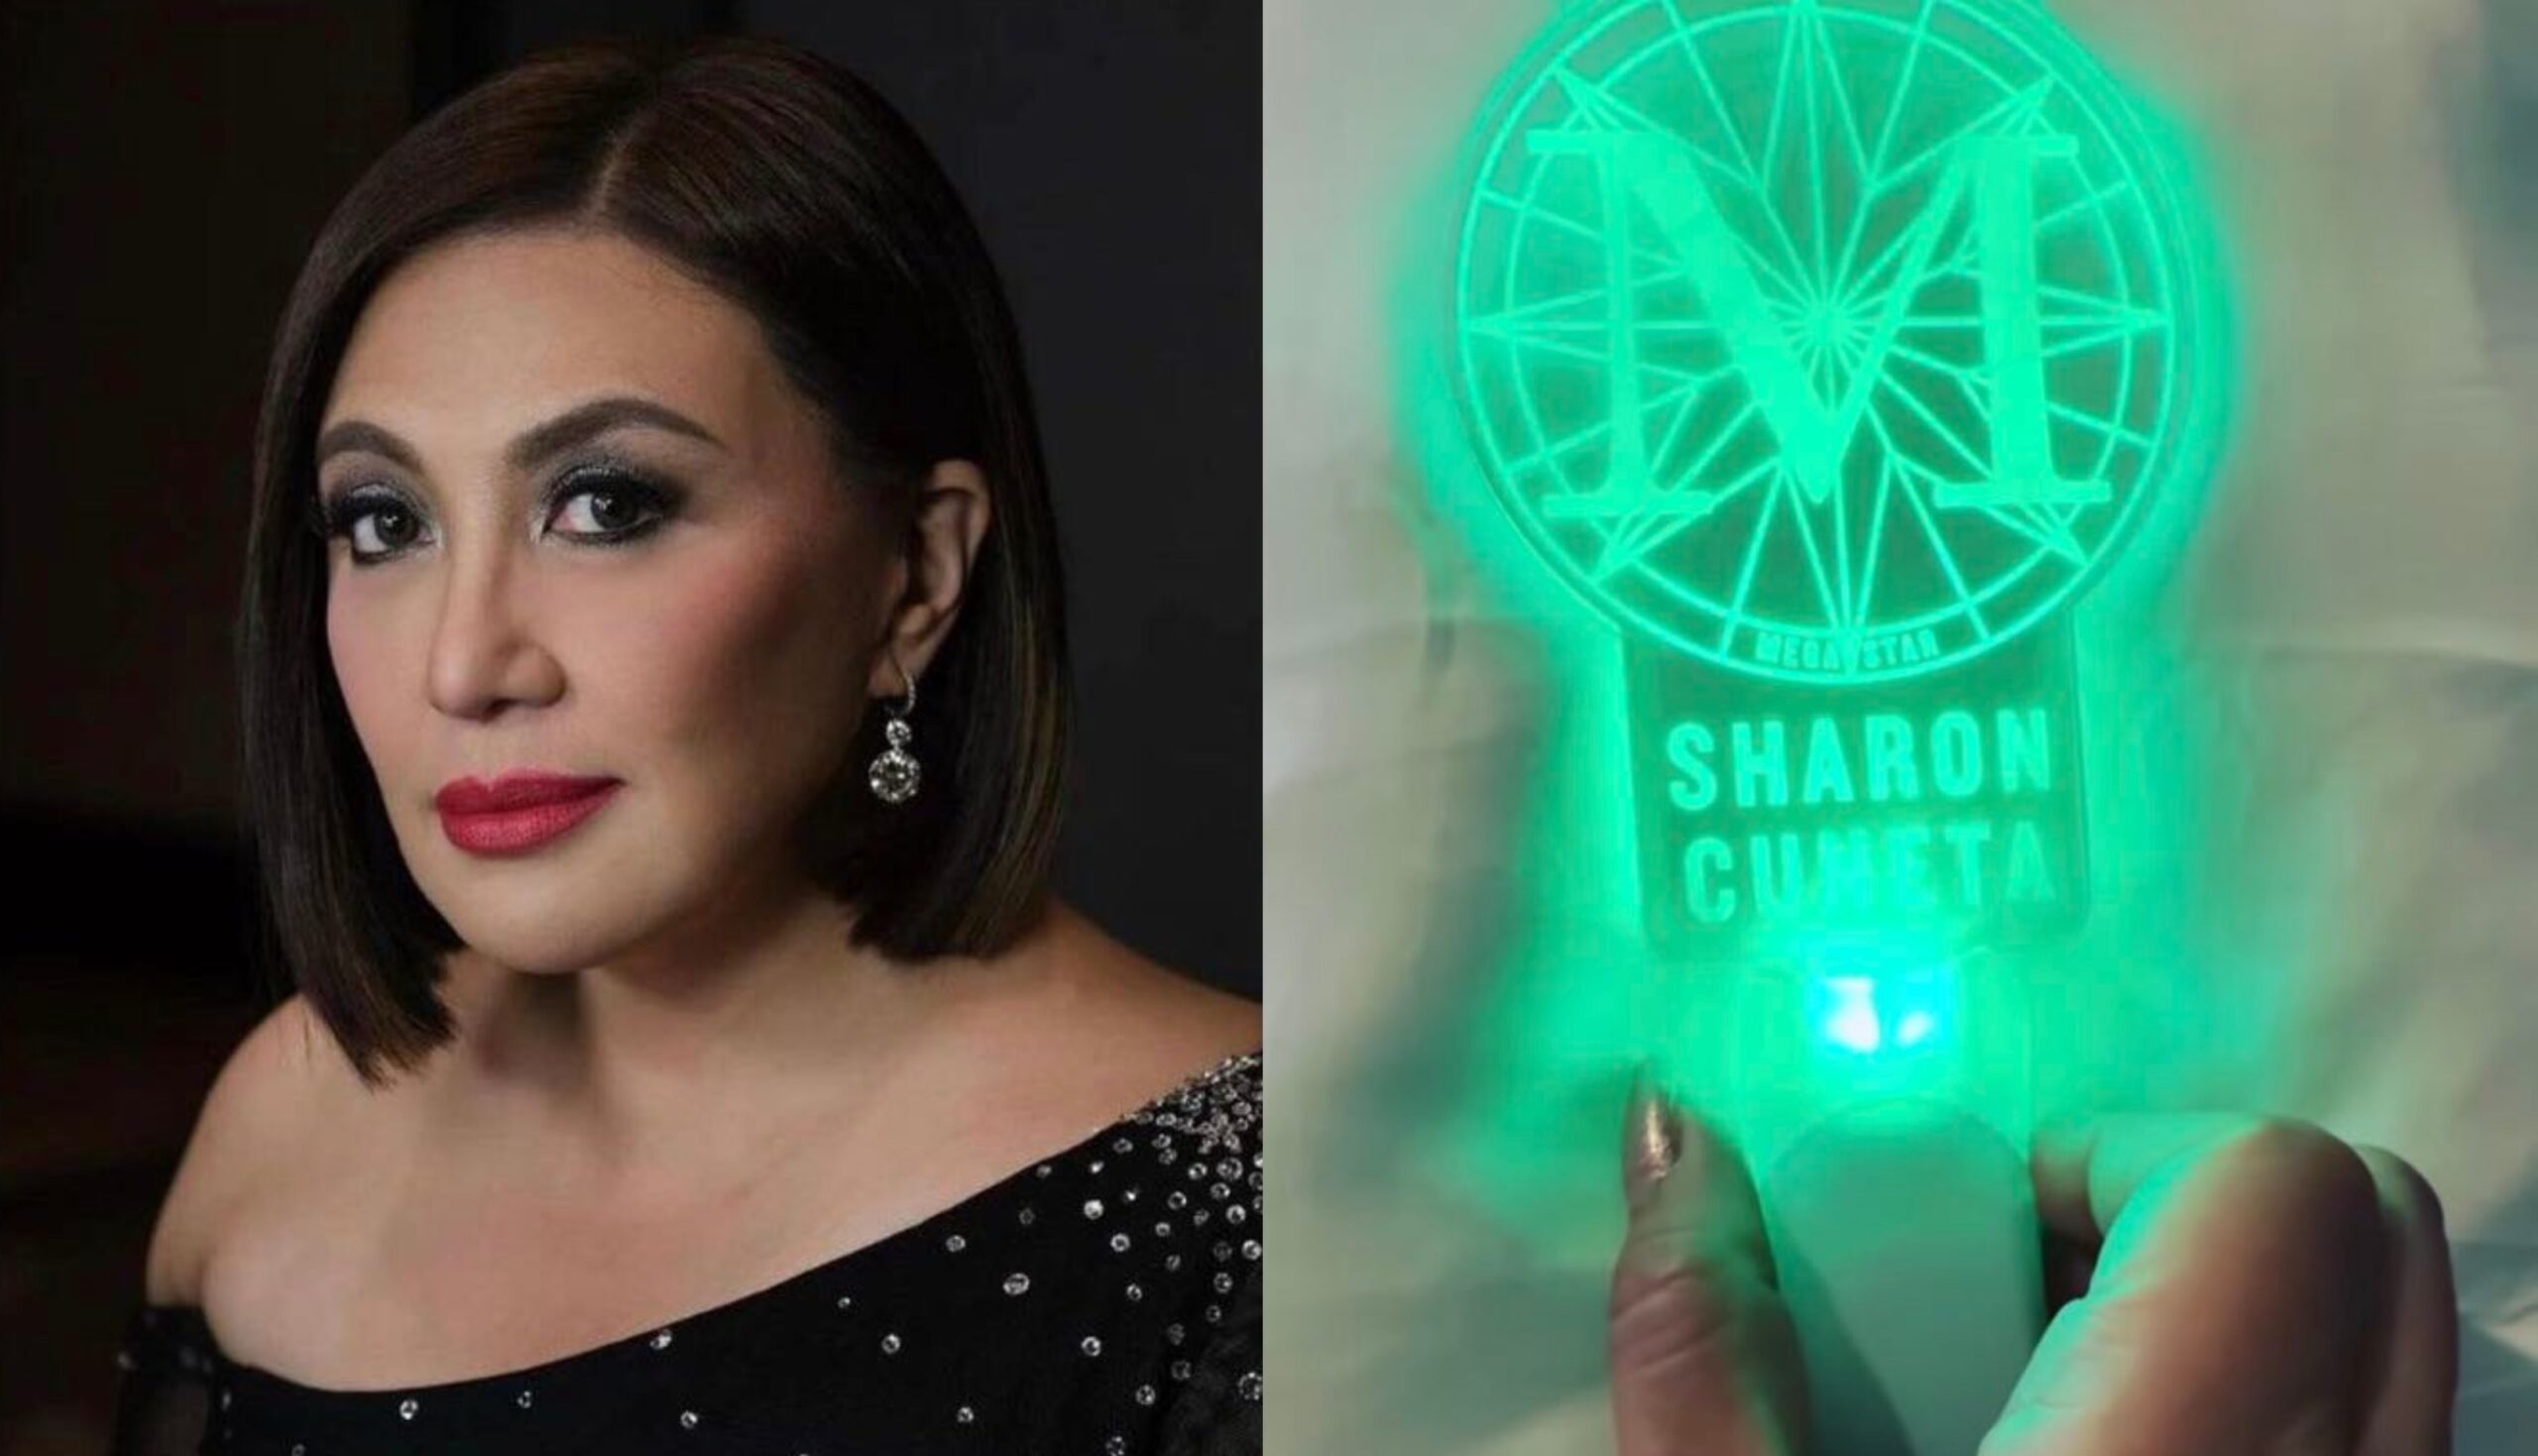 LOOK: Sharon Cuneta to release official lightstick for Sharonians